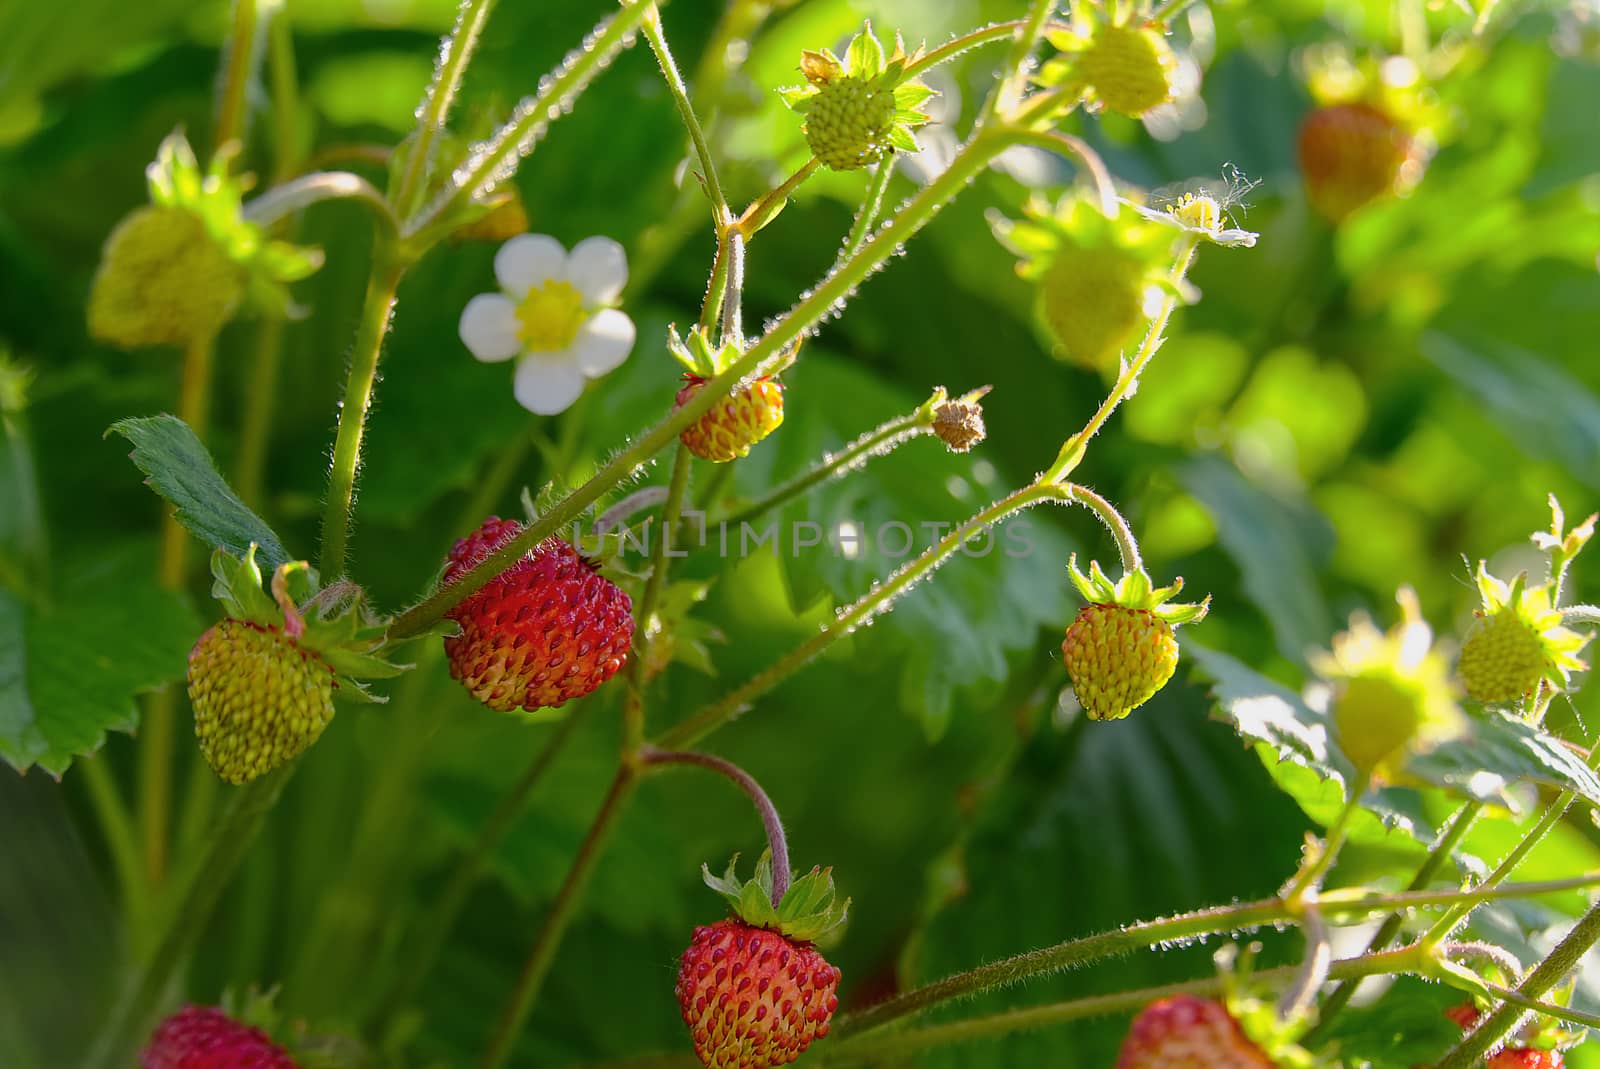 Red Fragaria Or Wild Strawberries, Growing Organic Wild Fragaria . Ripe Berry In Garden. Natural Organic Healthy Food Concept